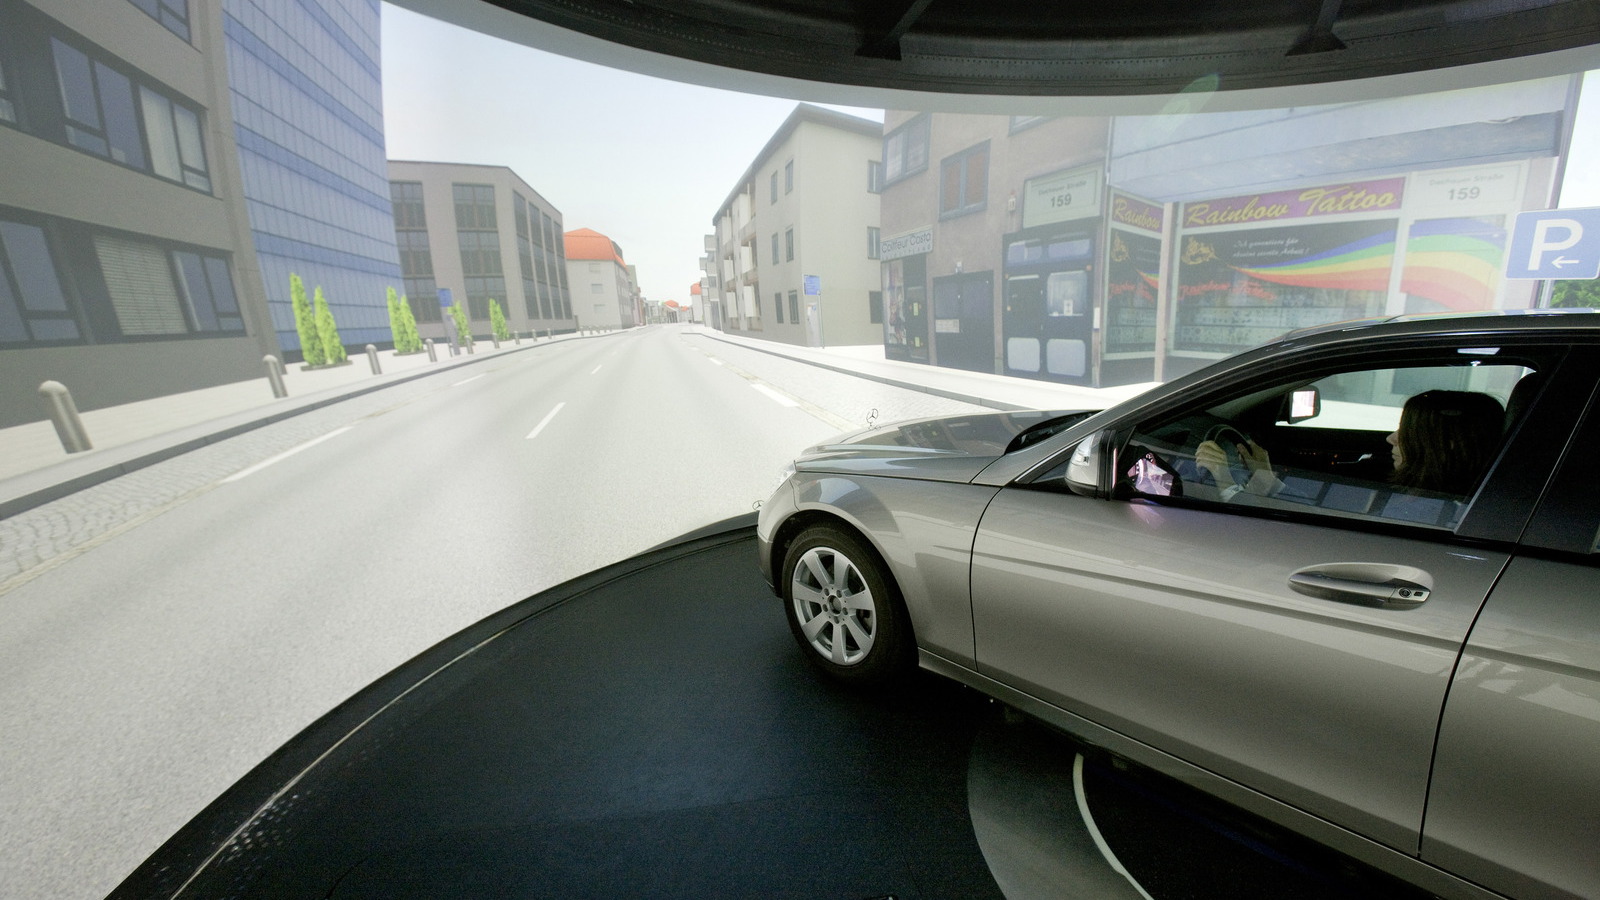 New Mercedes-Benz research facility and driving simulator